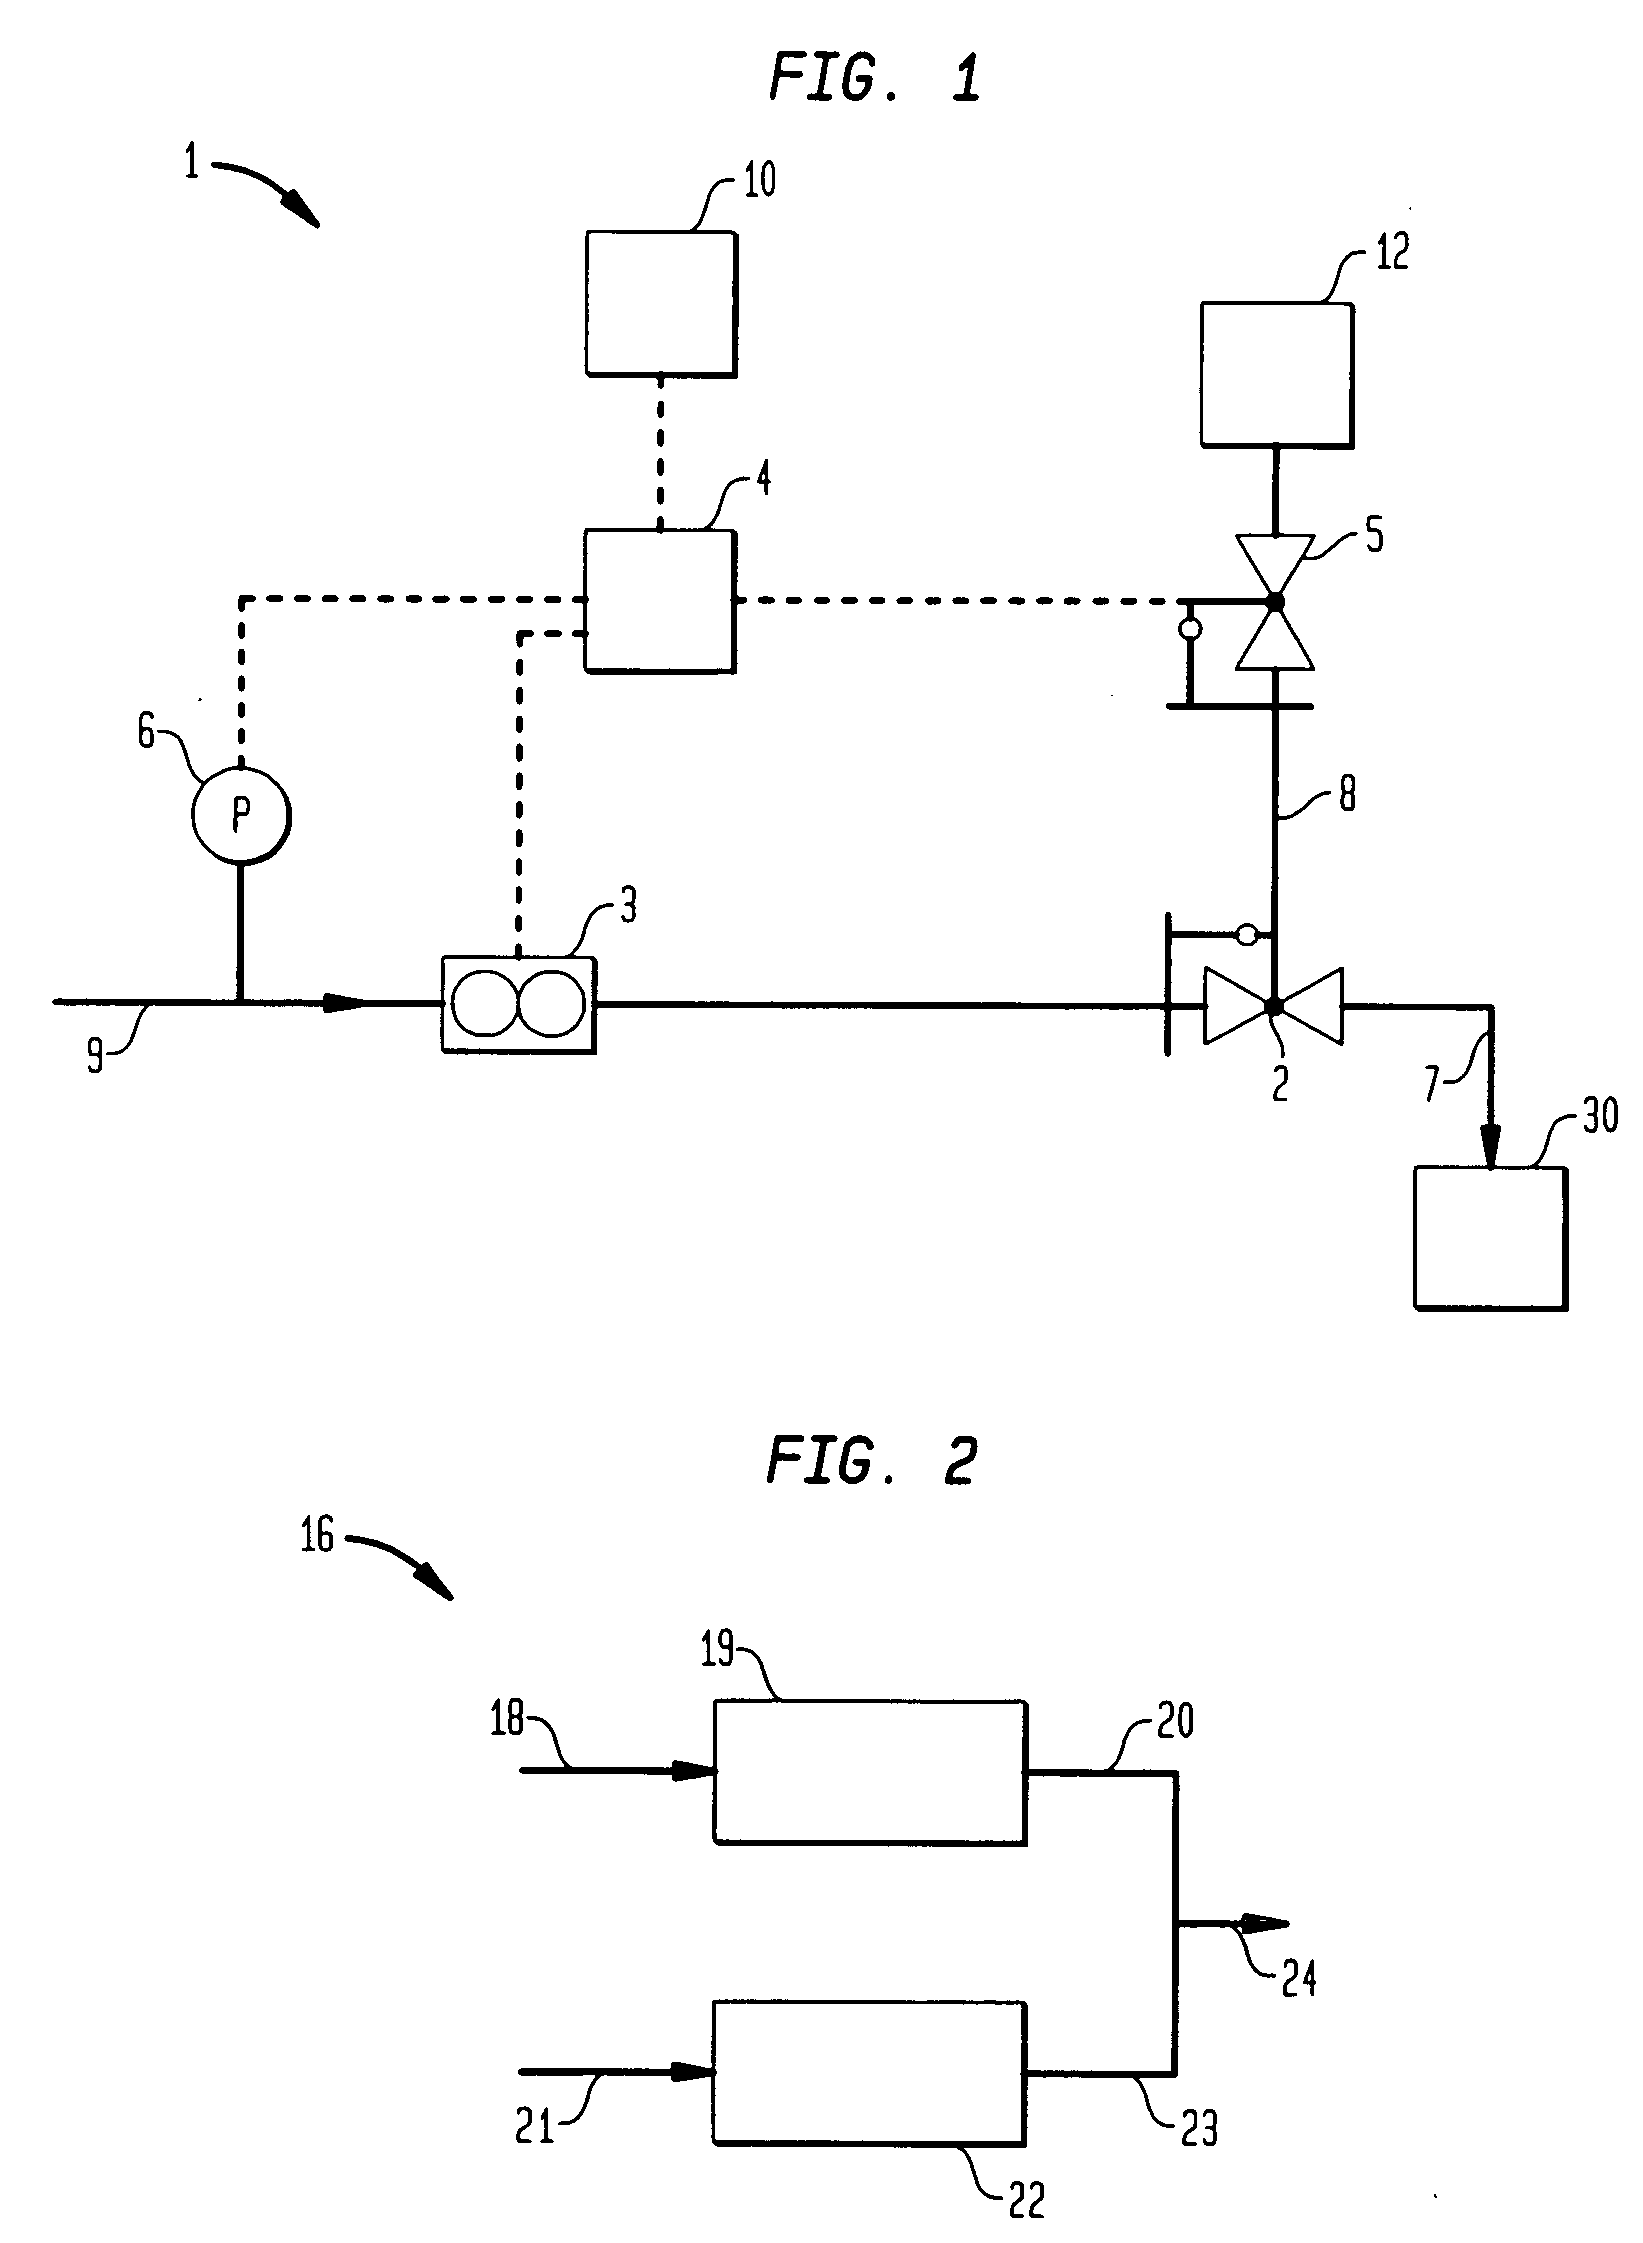 Device, method, and system for controlling fluid flow